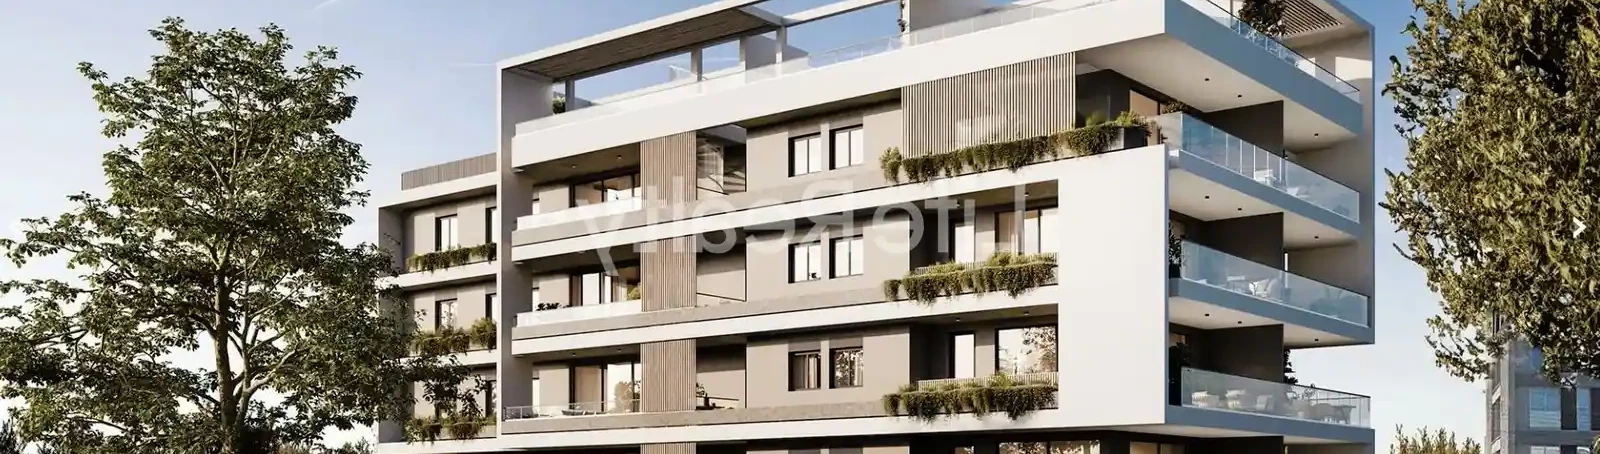 3-bedroom apartment fоr sаle €575.000, image 1